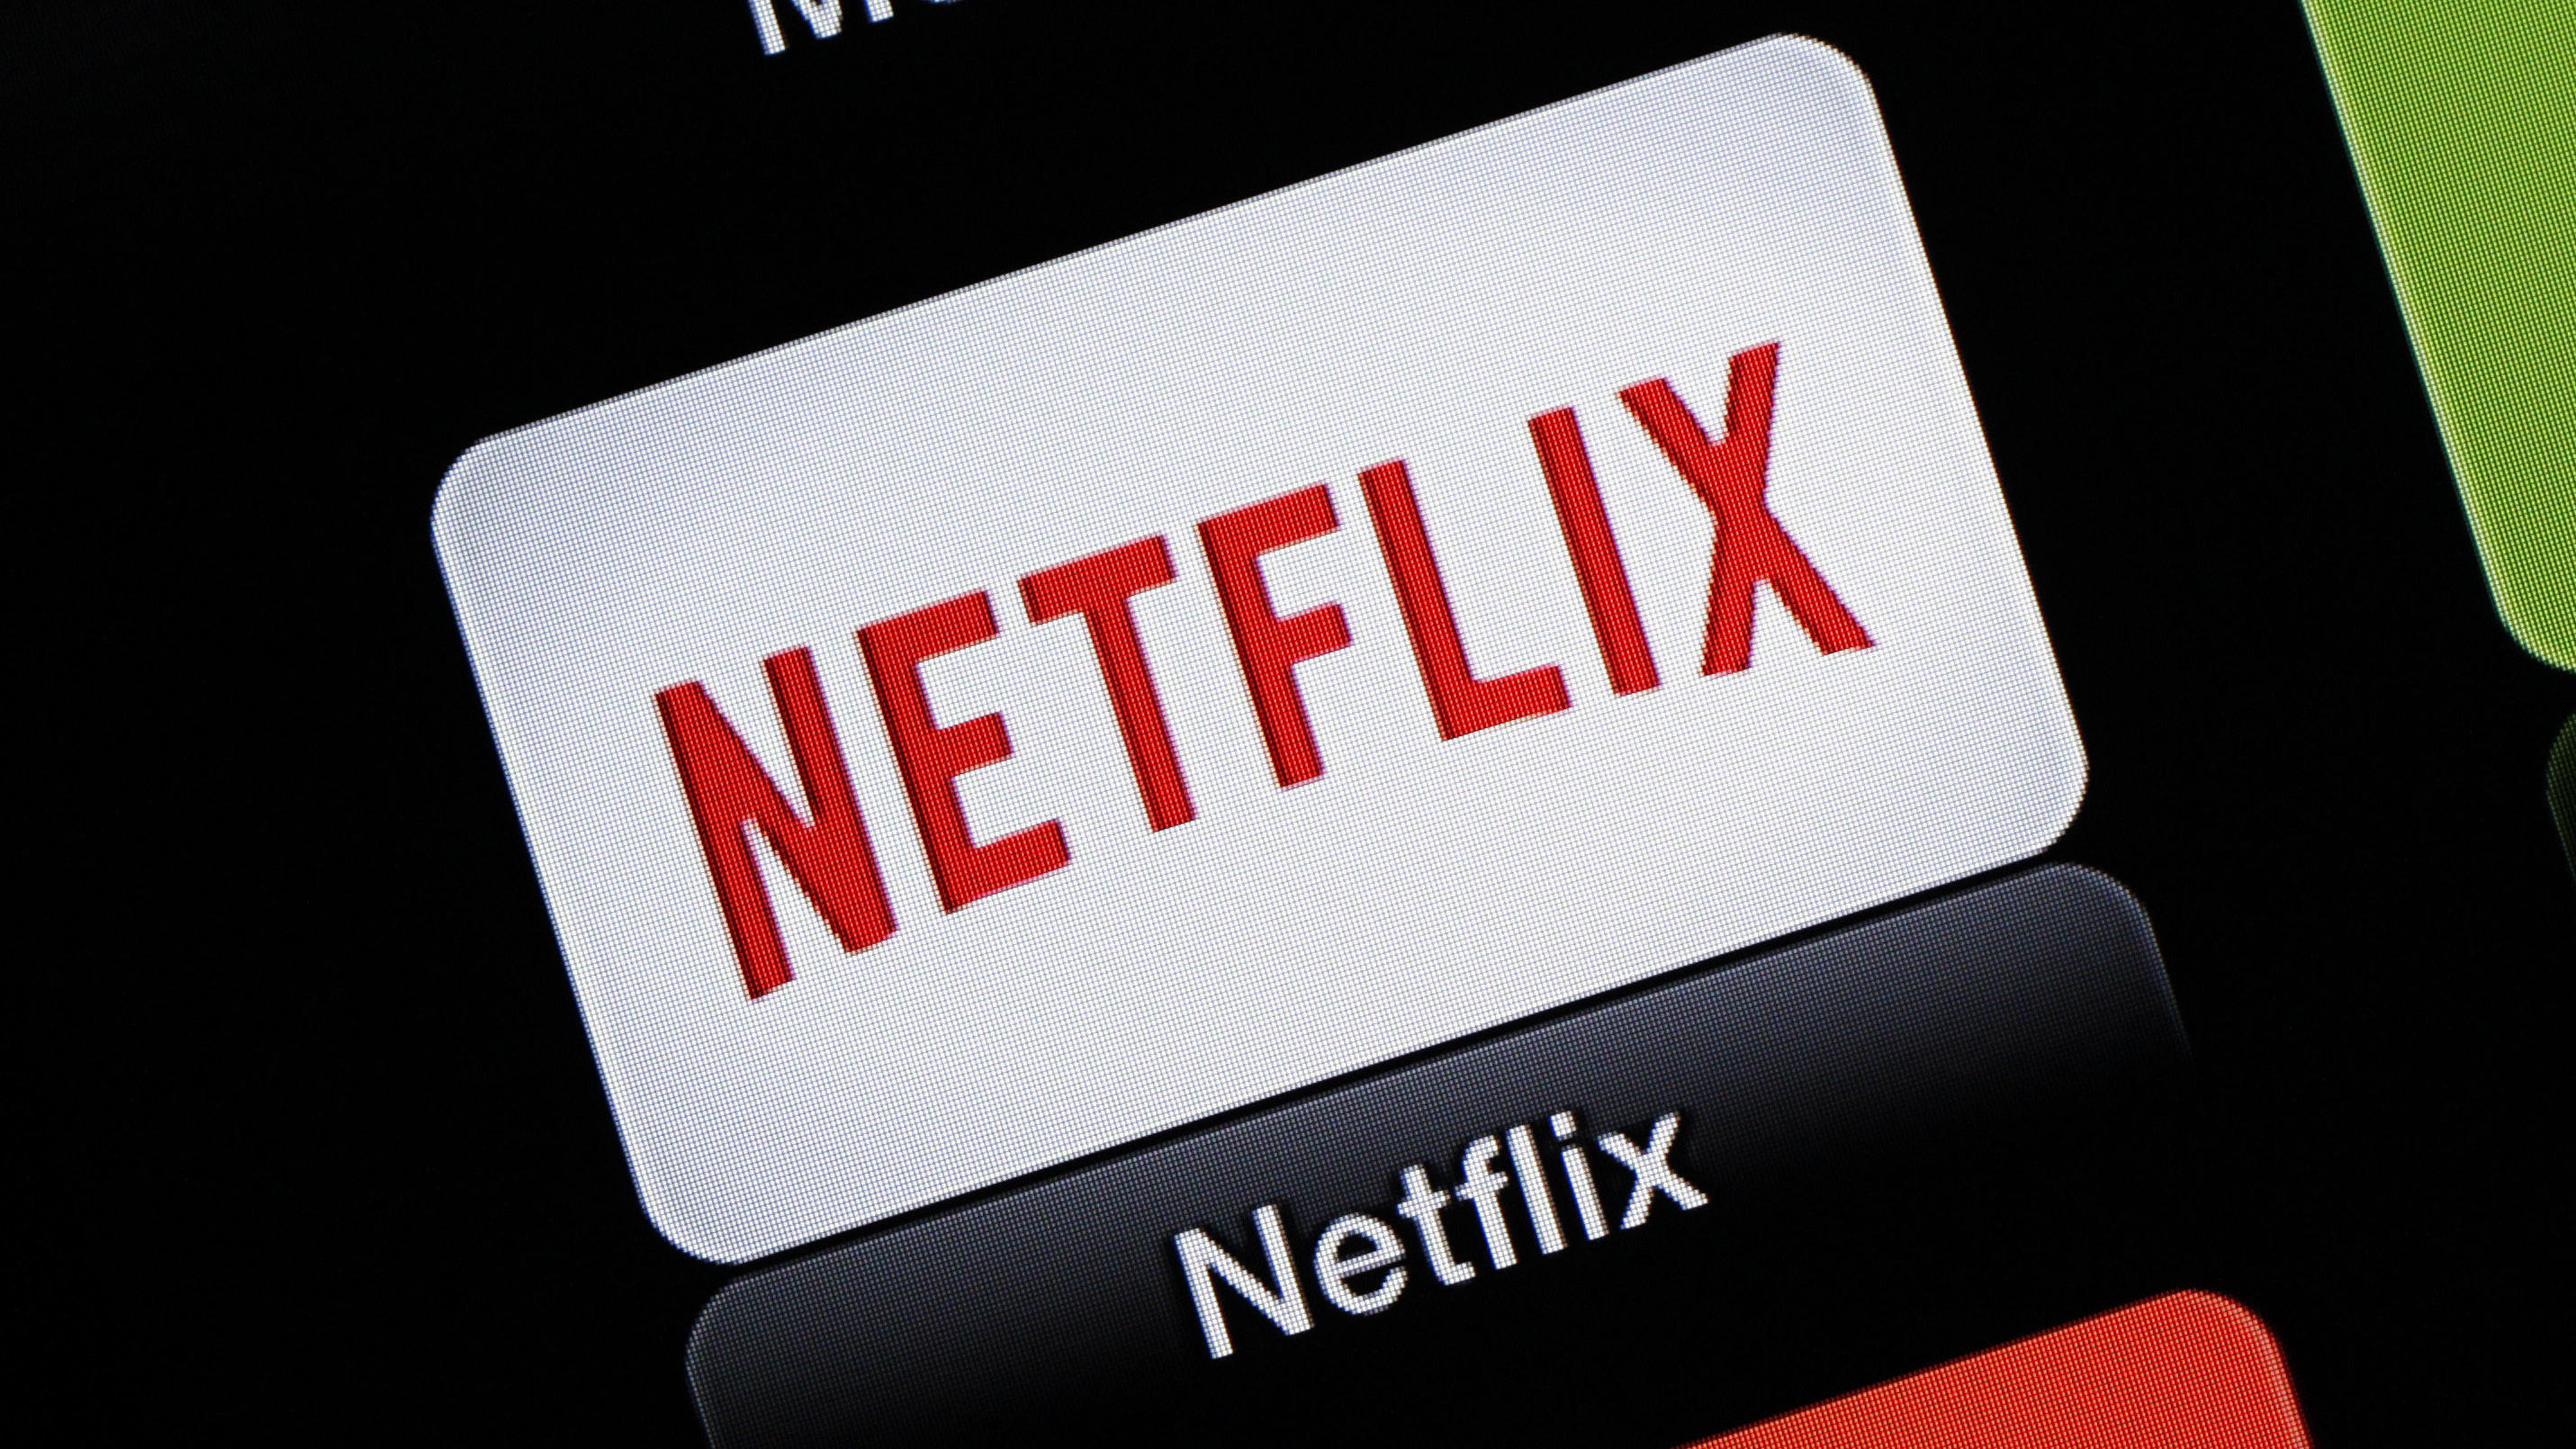 FILE - This June 24, 2015, file photo, shows the Netflix Apple TV app icon, in South Orange, N.J. Netflix reports financial results on Monday, April 18, 2016. Sports are on hold, movie theaters are closed and so are amusement parks. But Americans hel